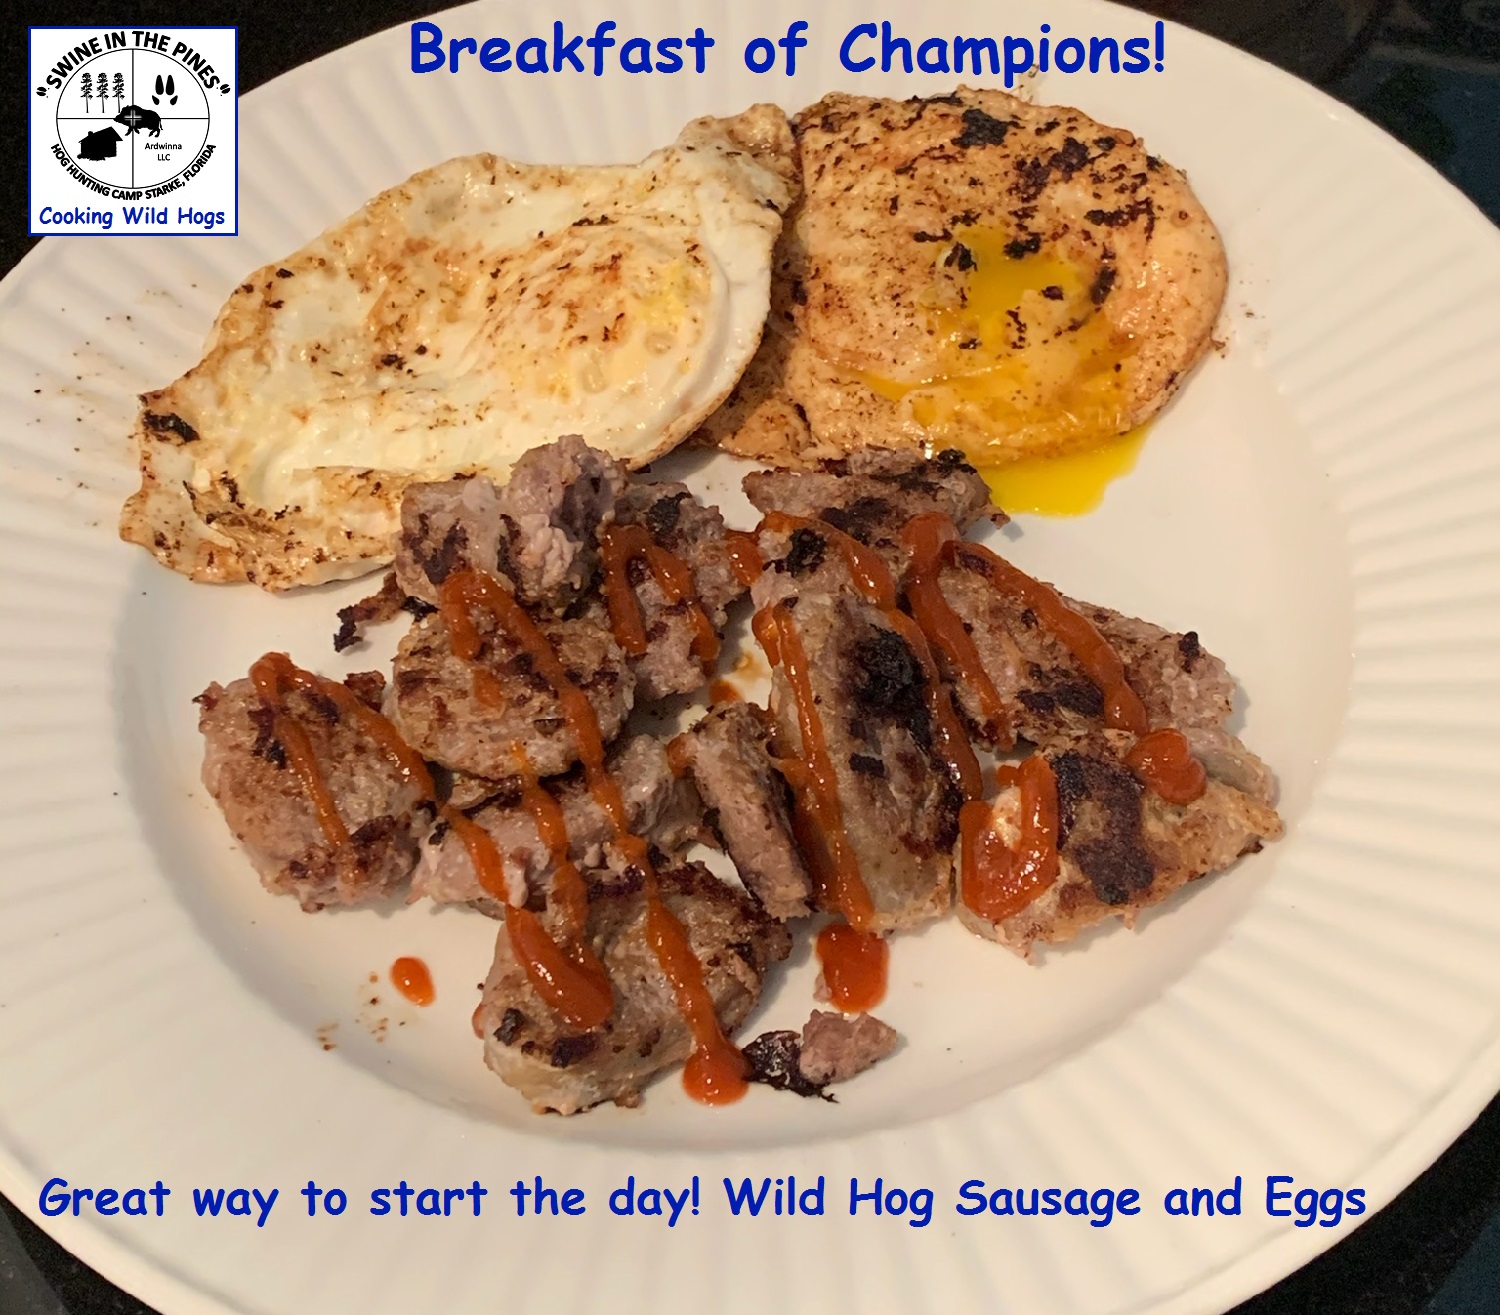 Breakfast of Champions! - Great way to start the day! Wild Hog Sausage and Eggs